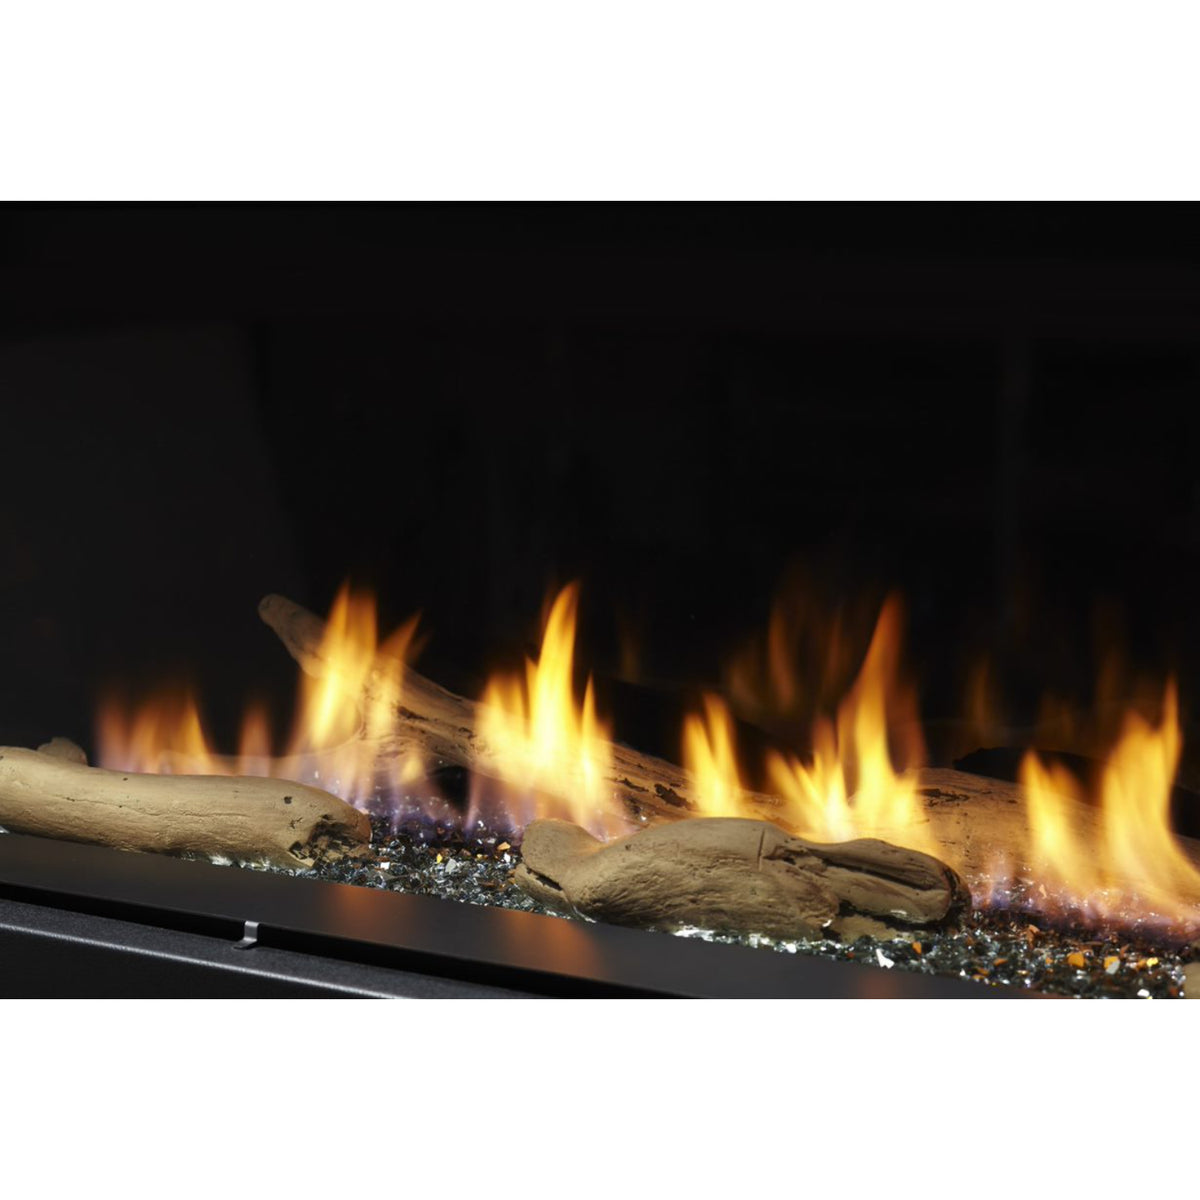 Majestic Echelon II Series Single-Sided Direct Vent Linear Gas Fireplace with IntelliFire Touch Ignition System